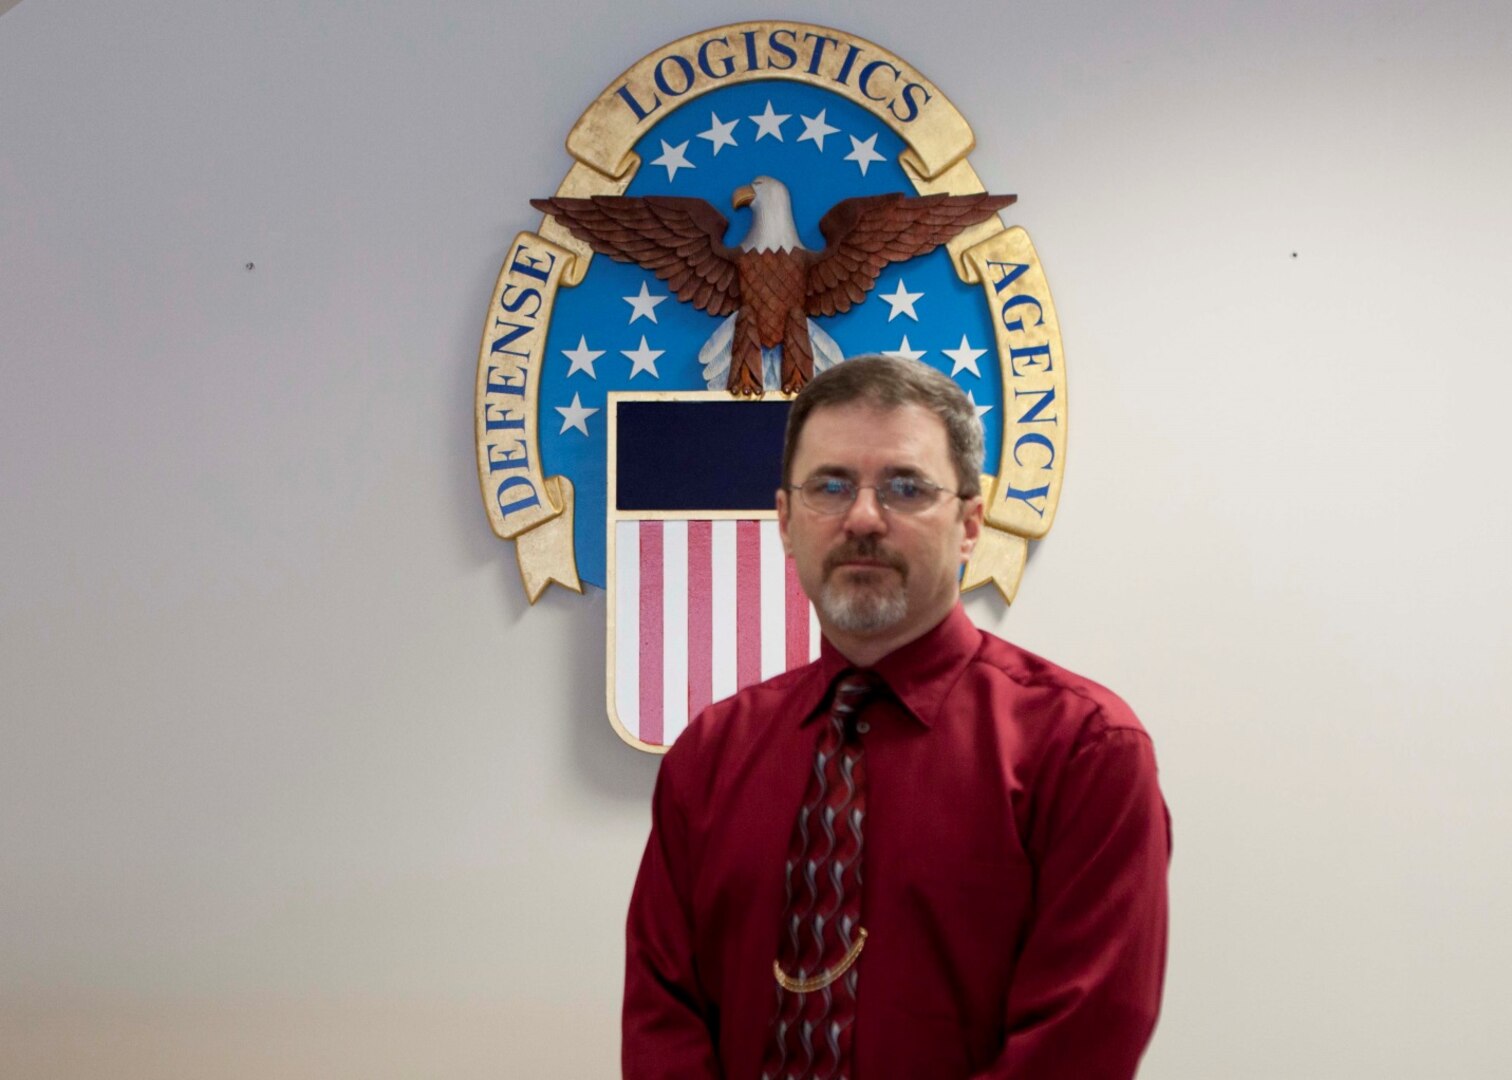 Charles Barner, supervisory program analyst in Defense Logistics Agency Distribution’s Acquisition Operations directorate, has been awarded the Global Distribution Excellence: Supervisory Acquisition Civilian of the Year award.